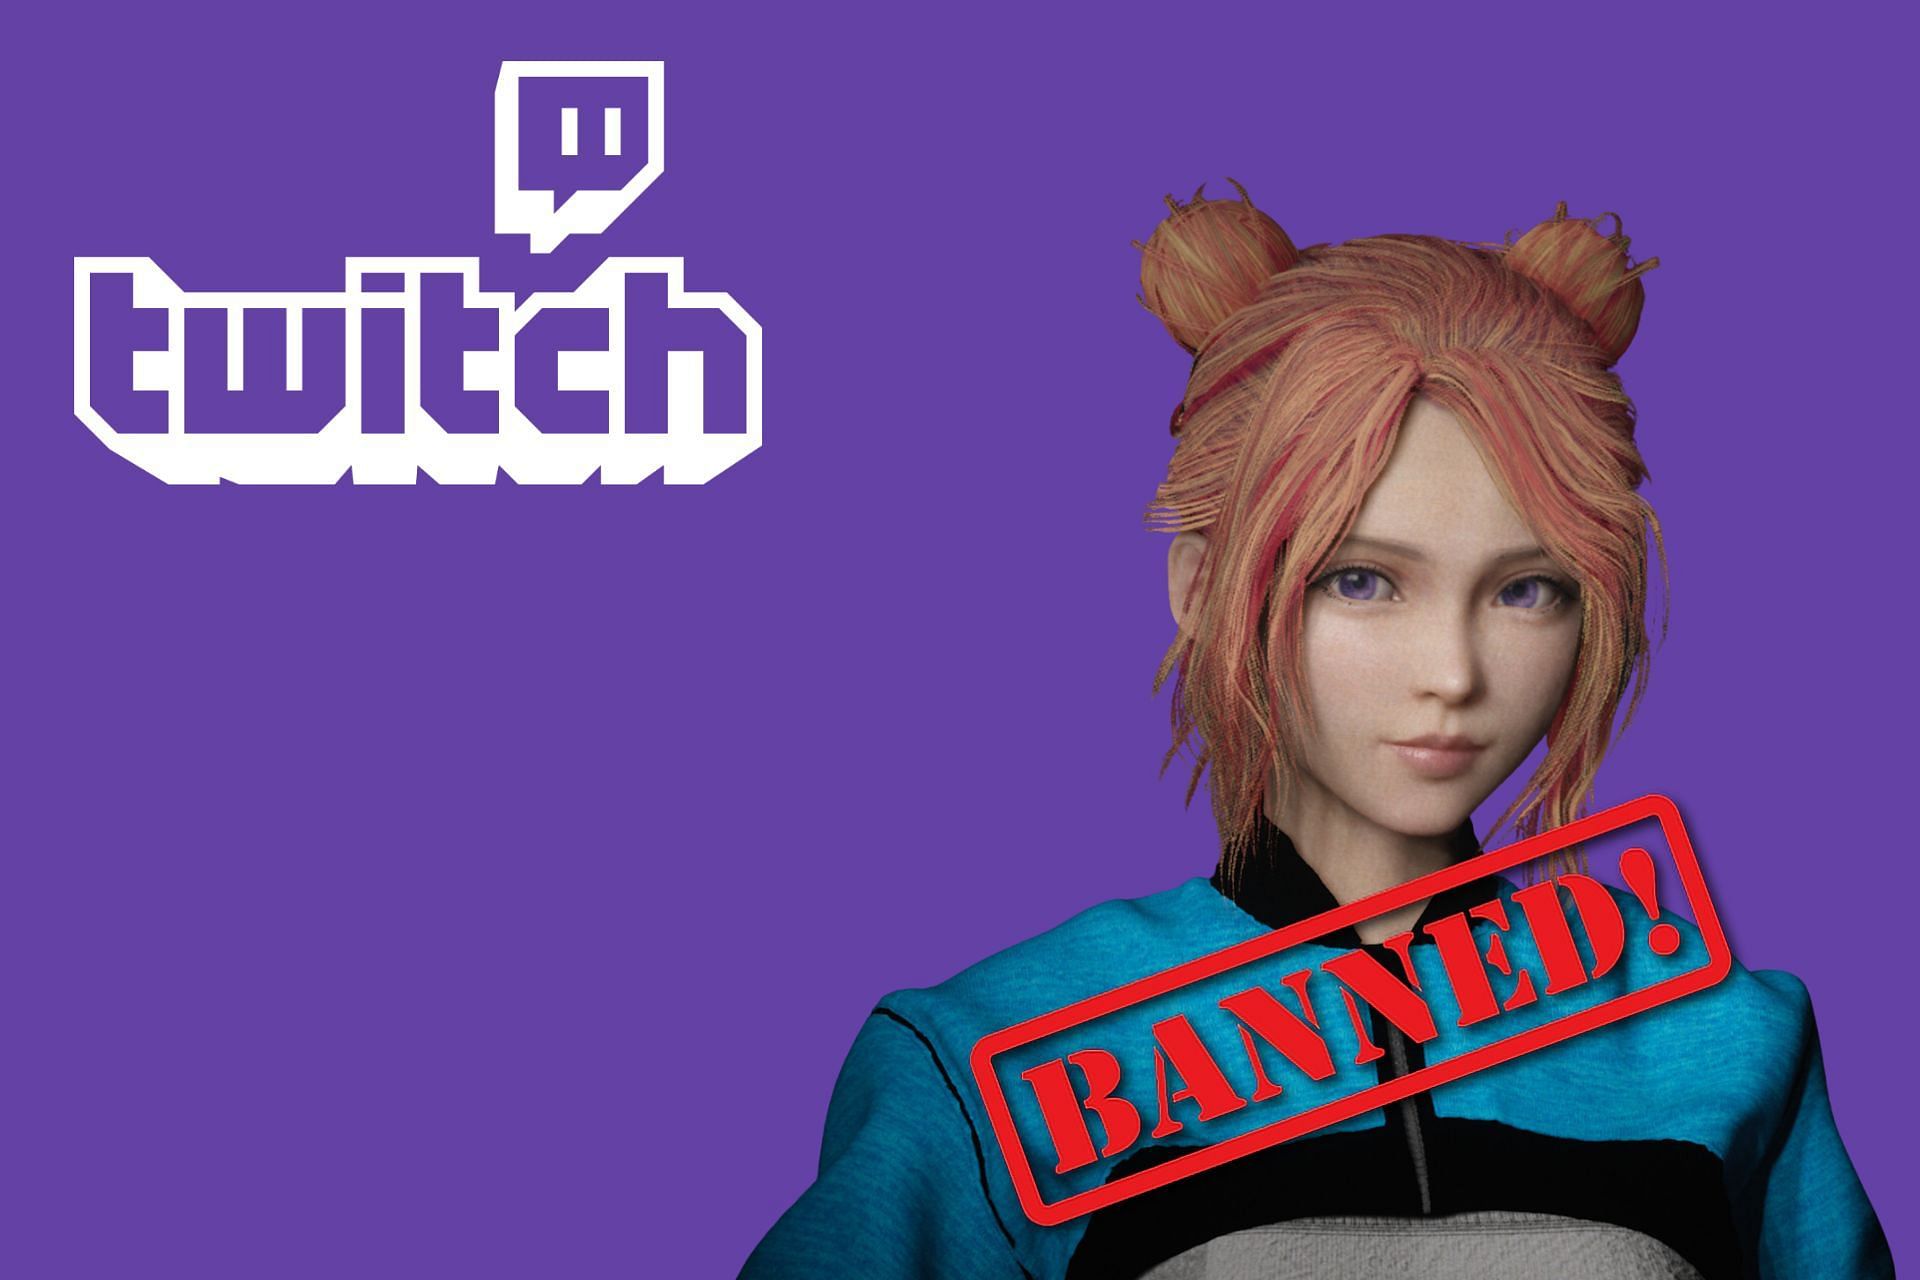 CodeMiko was banned once again on Twitch on June 7, 2022 (Image via Sportskeeda)